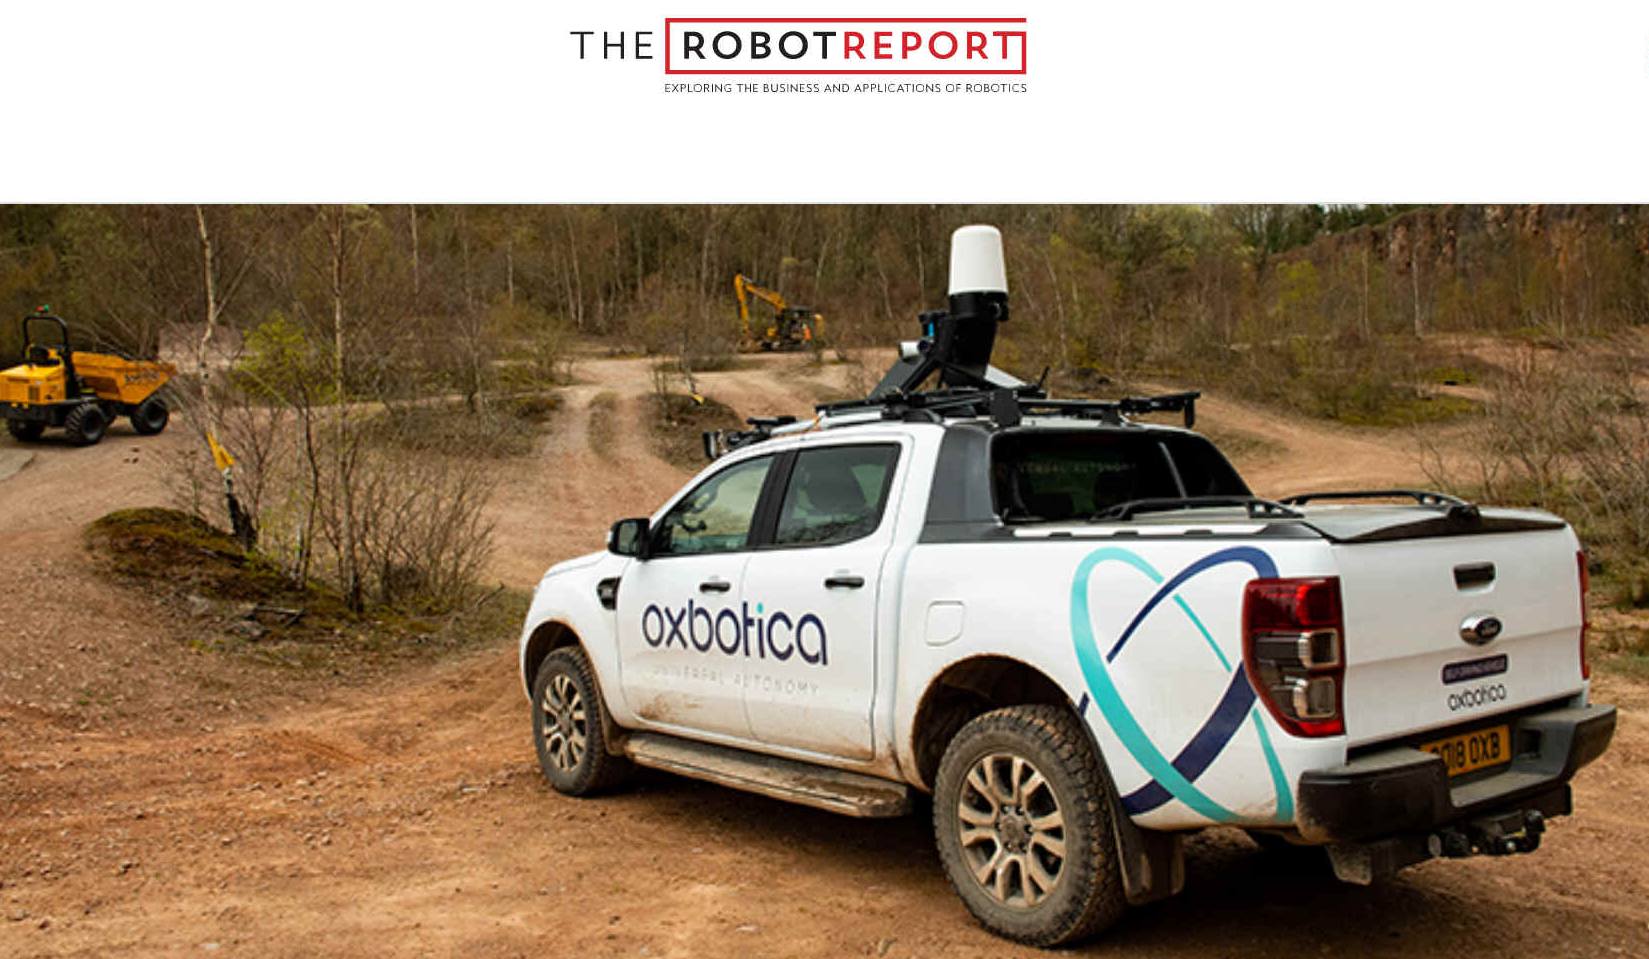 Oxbotica and TRL working with 4x4 off road robotic trucks